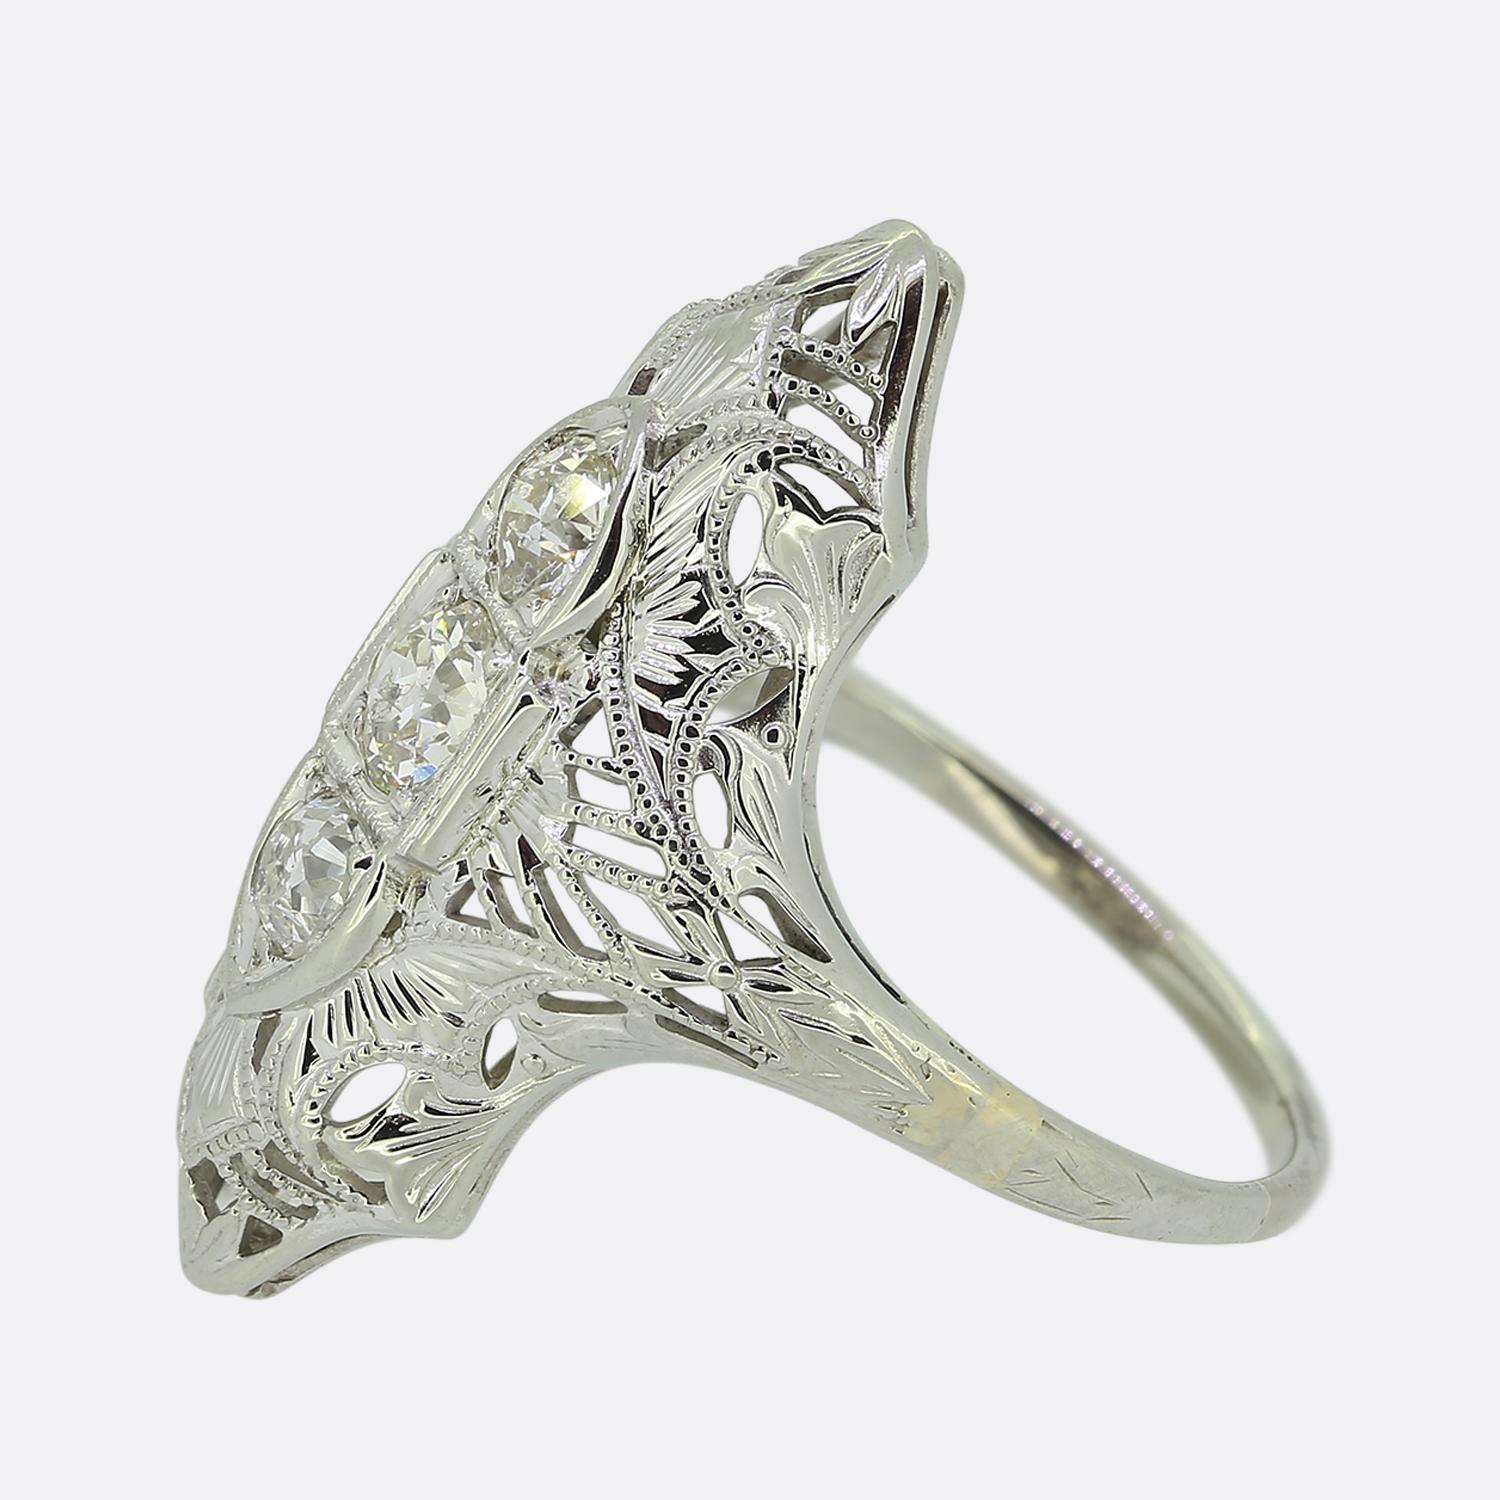 Here we have a delightful Art Deco three-stone diamond ring. Three round faceted old cut diamonds have been individually claw set atop of one another in a vertical fashion amidst a fine milgrain bordering at the centre of the face. This detailing